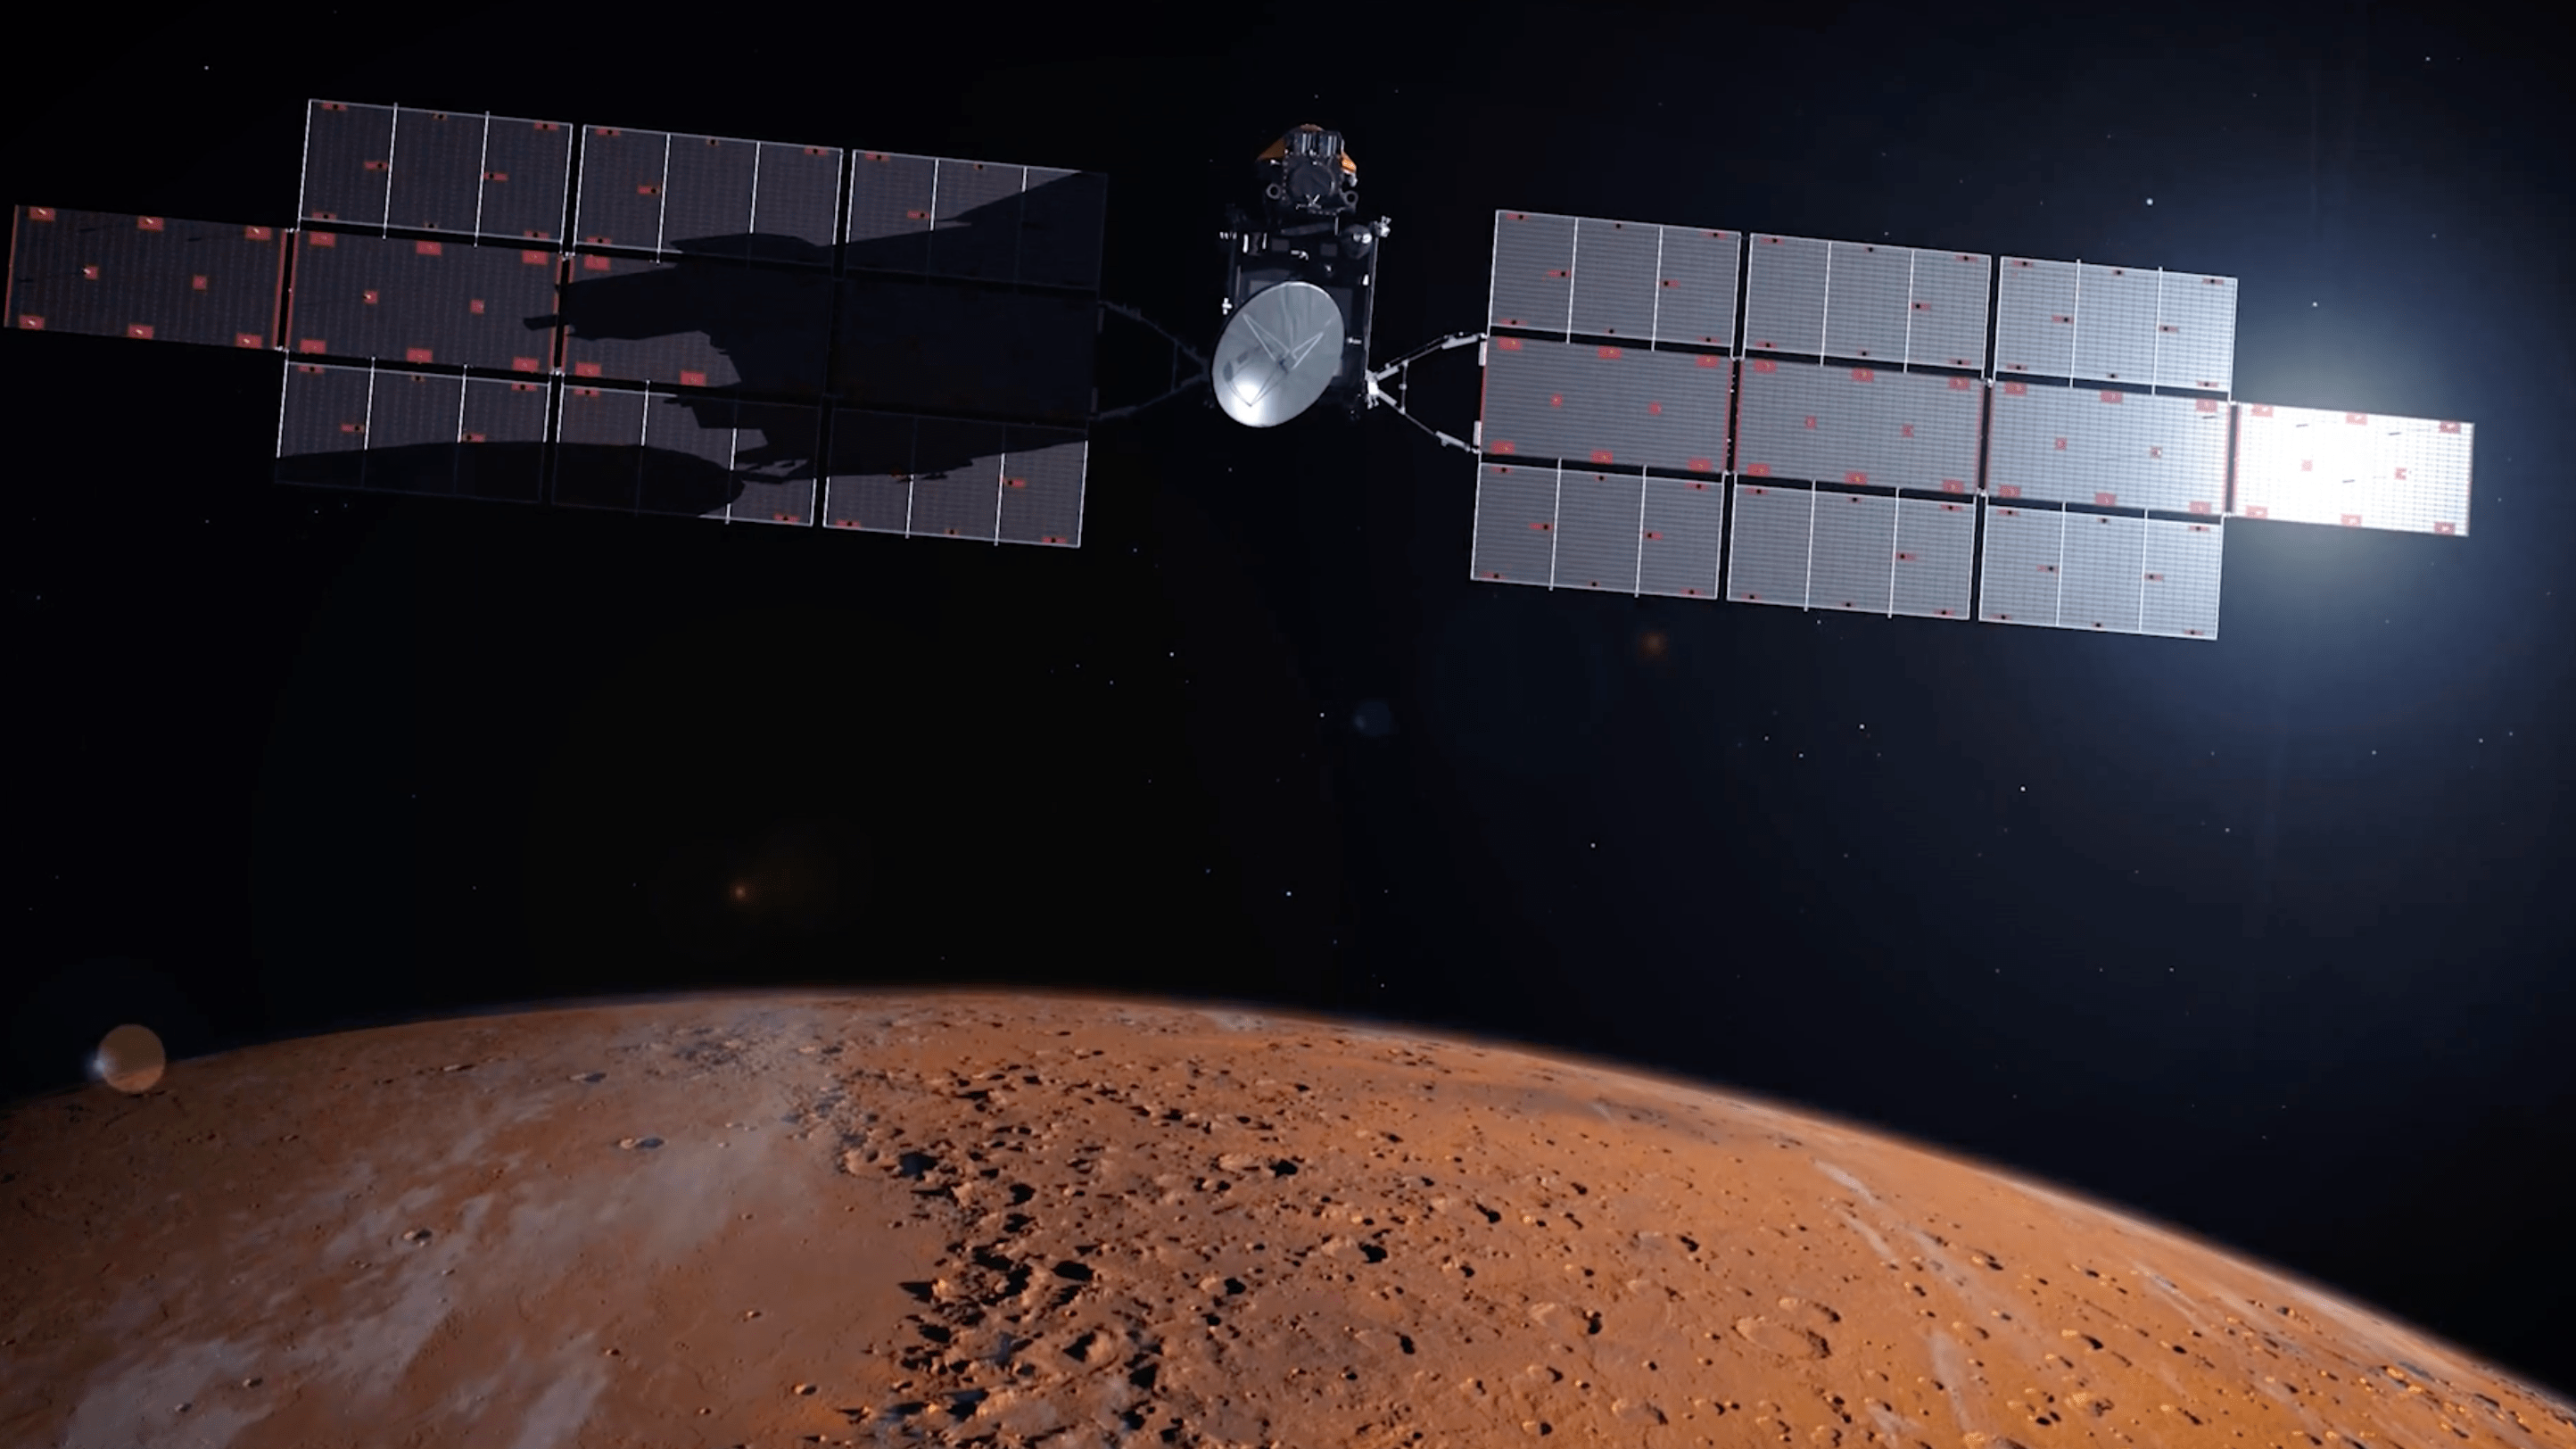 A boxy spacecraft with wide solar panels is depicted over Mars.